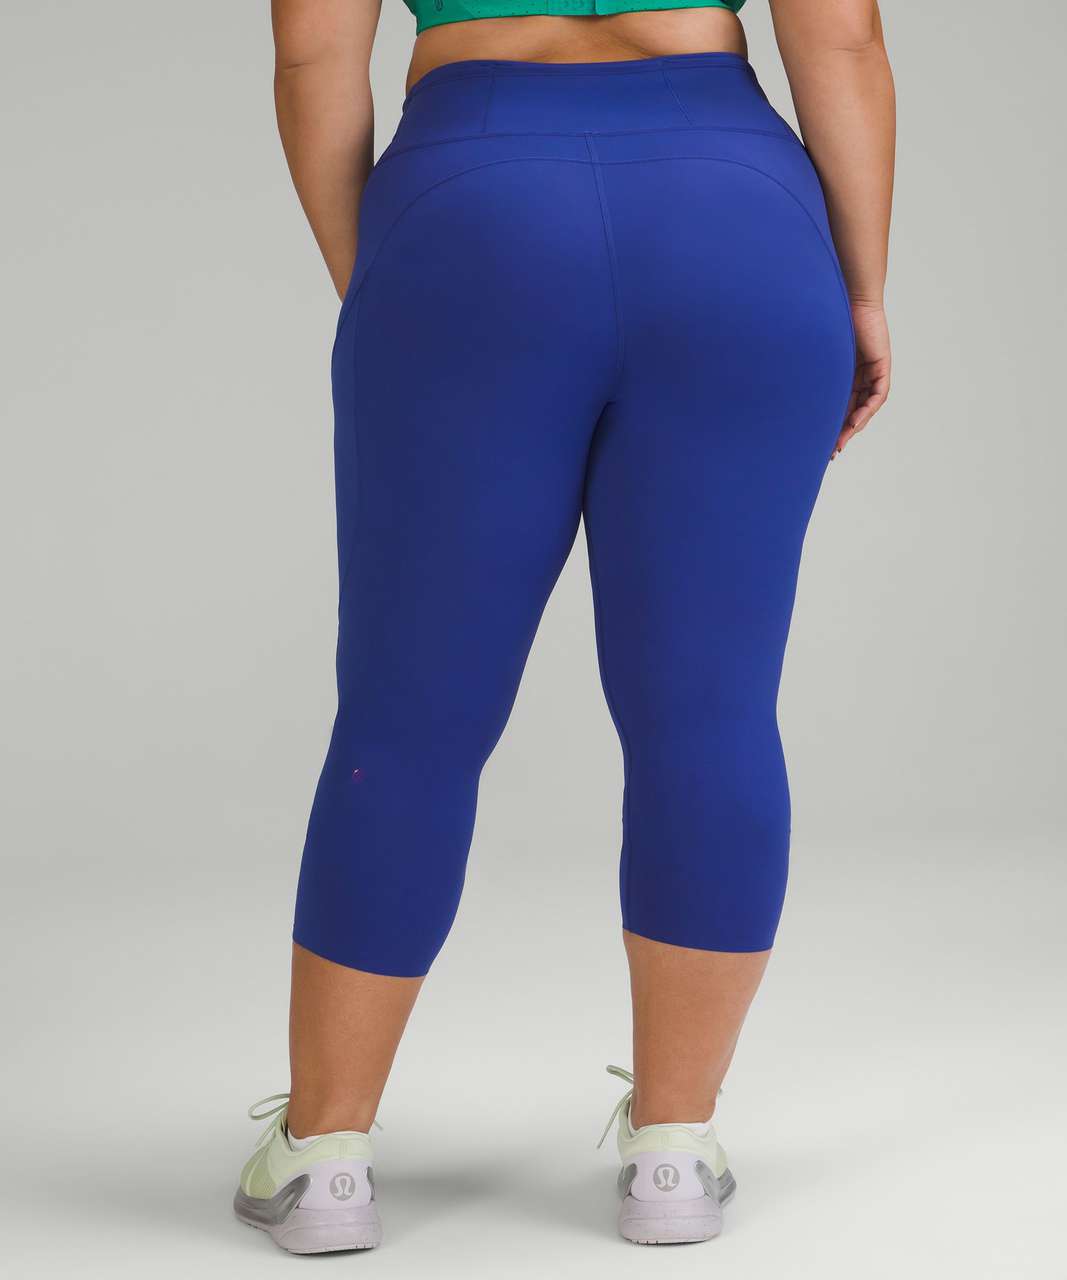 Lululemon Fast and Free High-Rise Crop 23" - Psychic